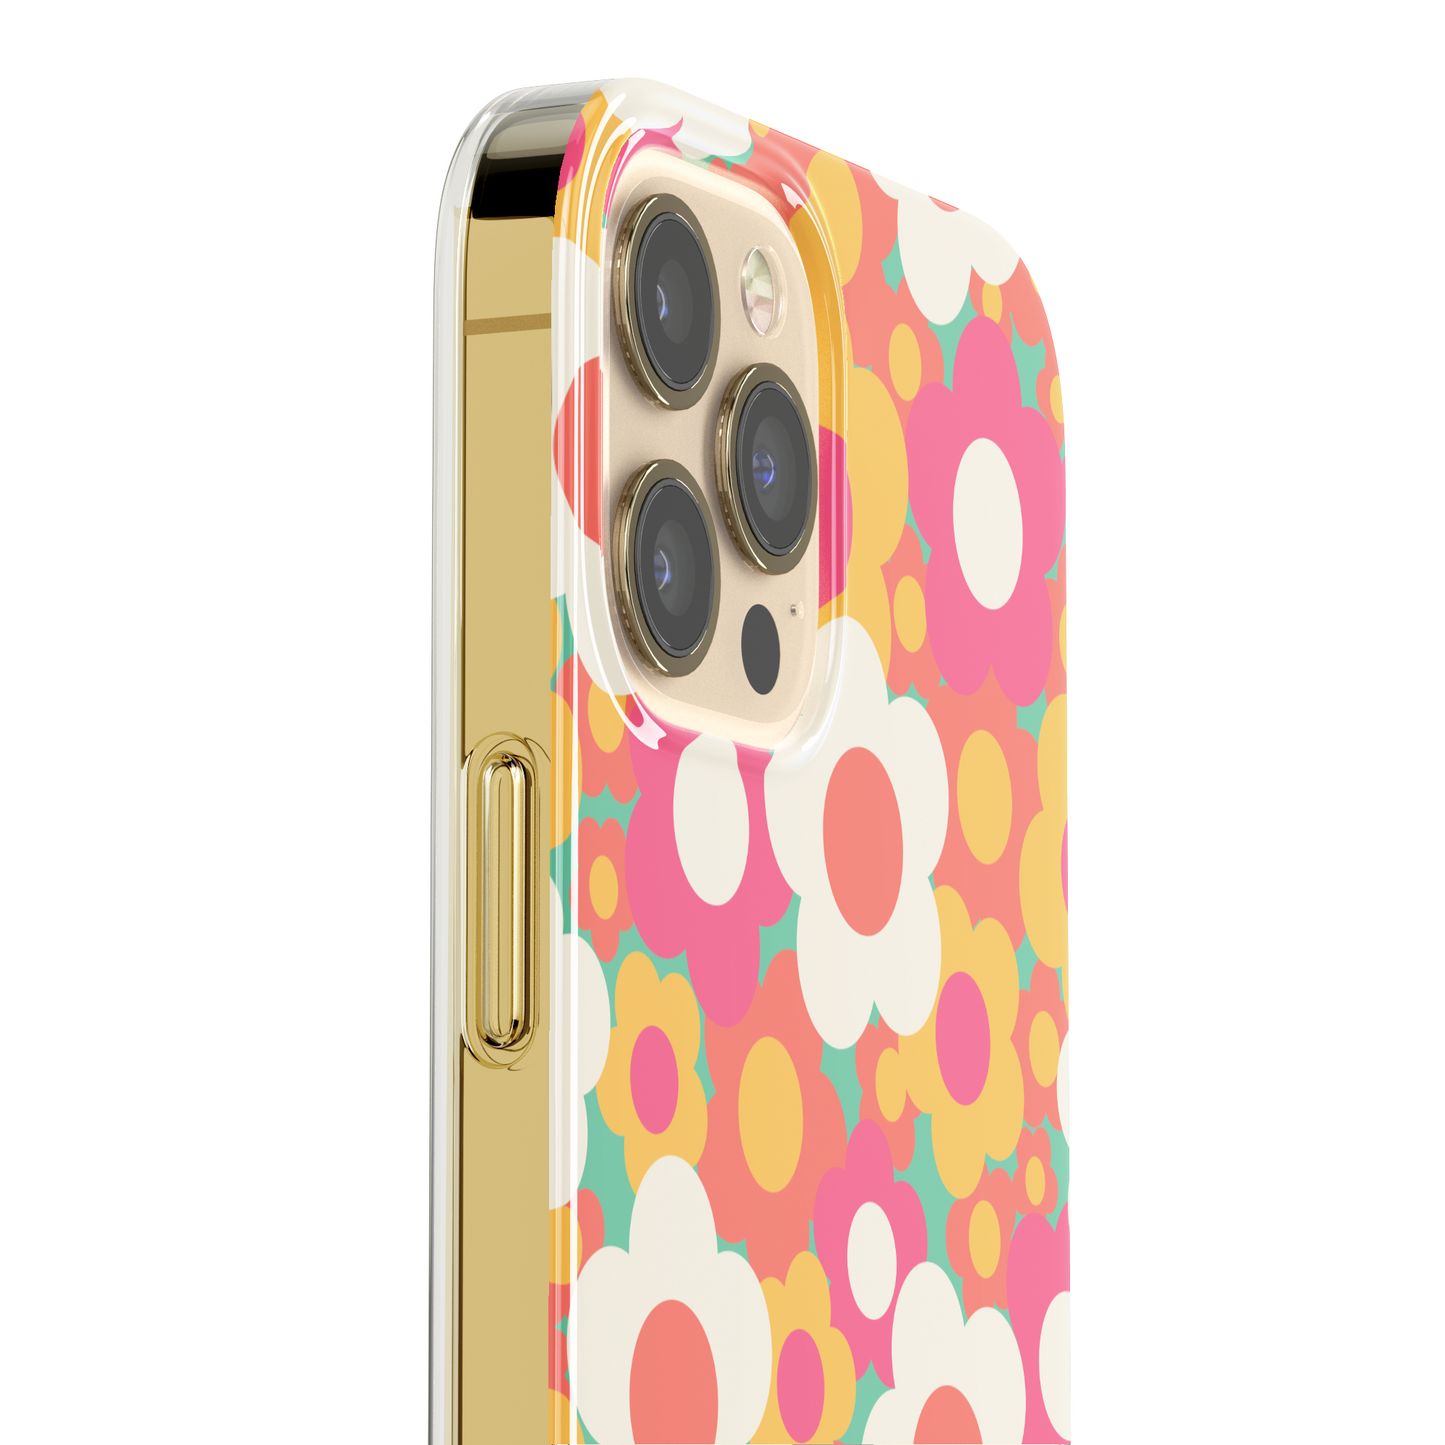 Stay Groovy iPhone 12 Case